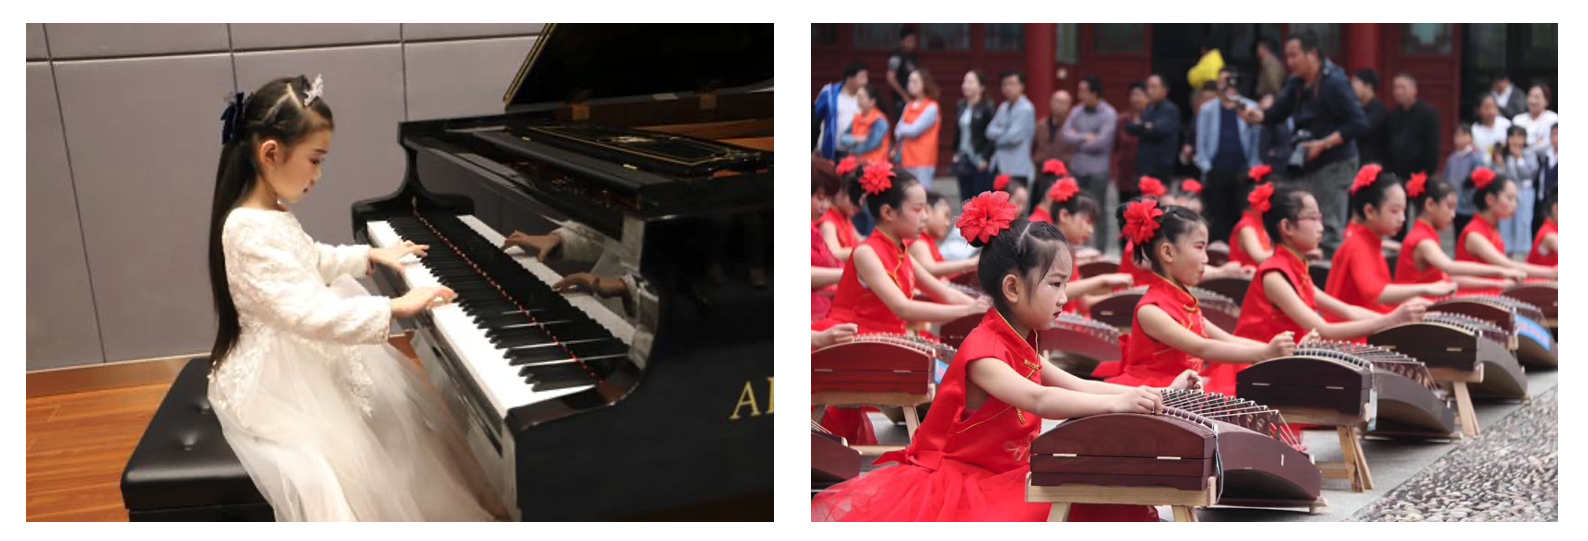 Children in China learning piano and guzheng from a young age for extracurricular activities
